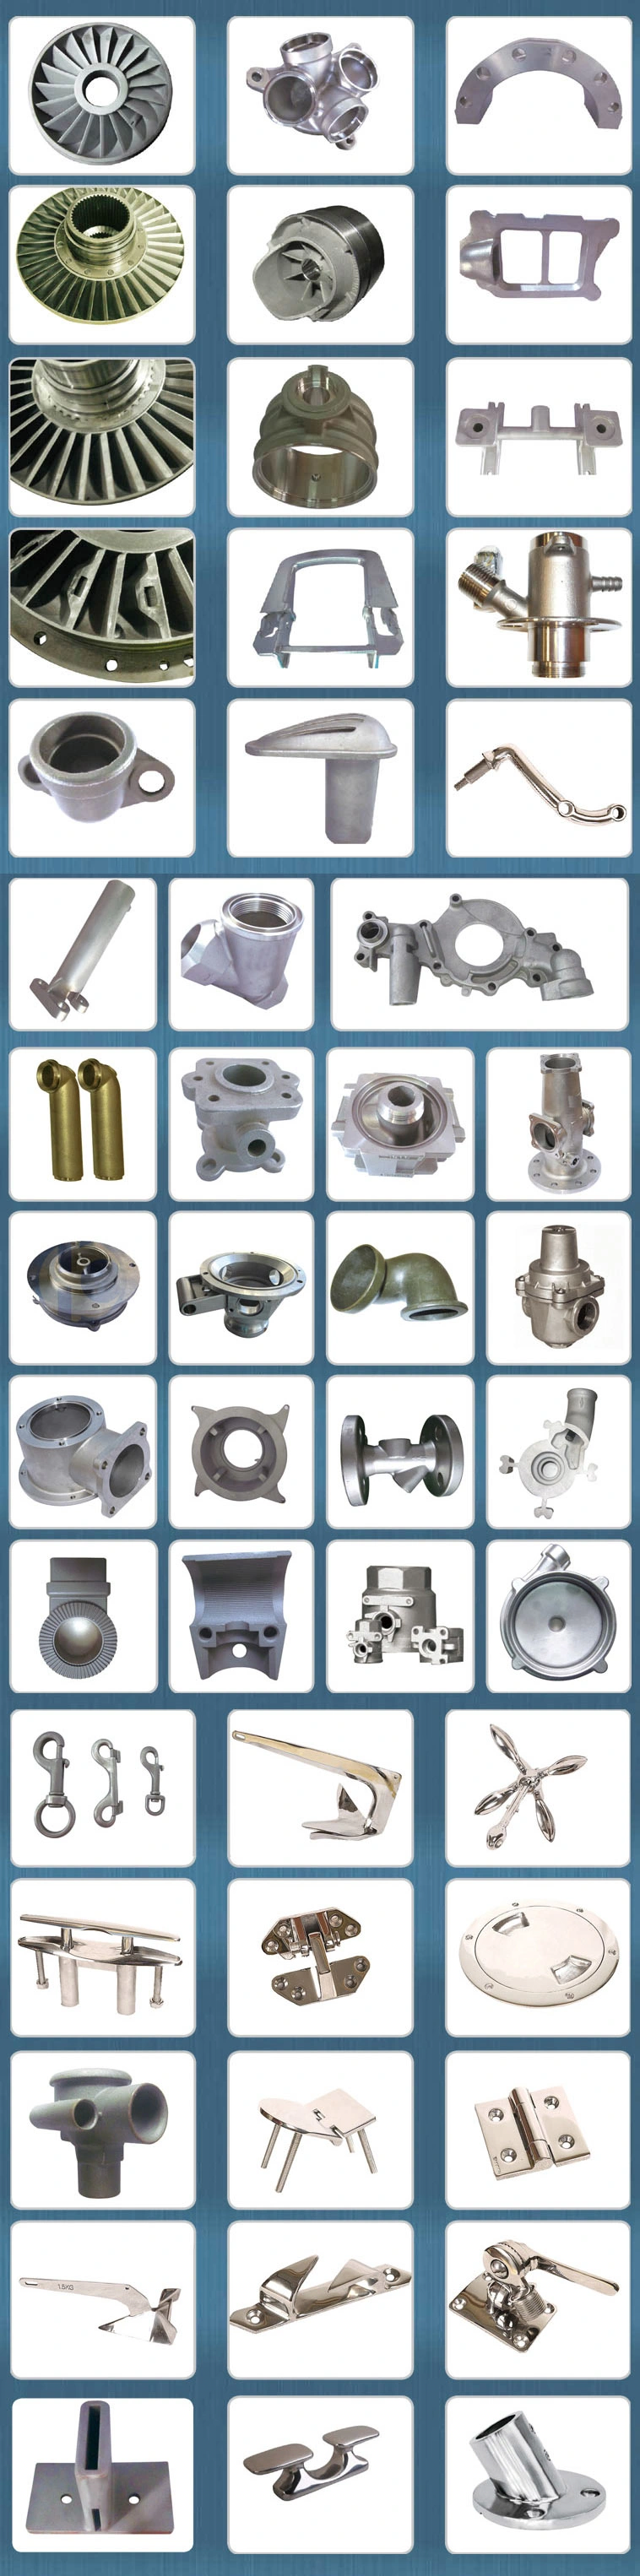 Electric Power Fittings Made by Lost Wax Casting